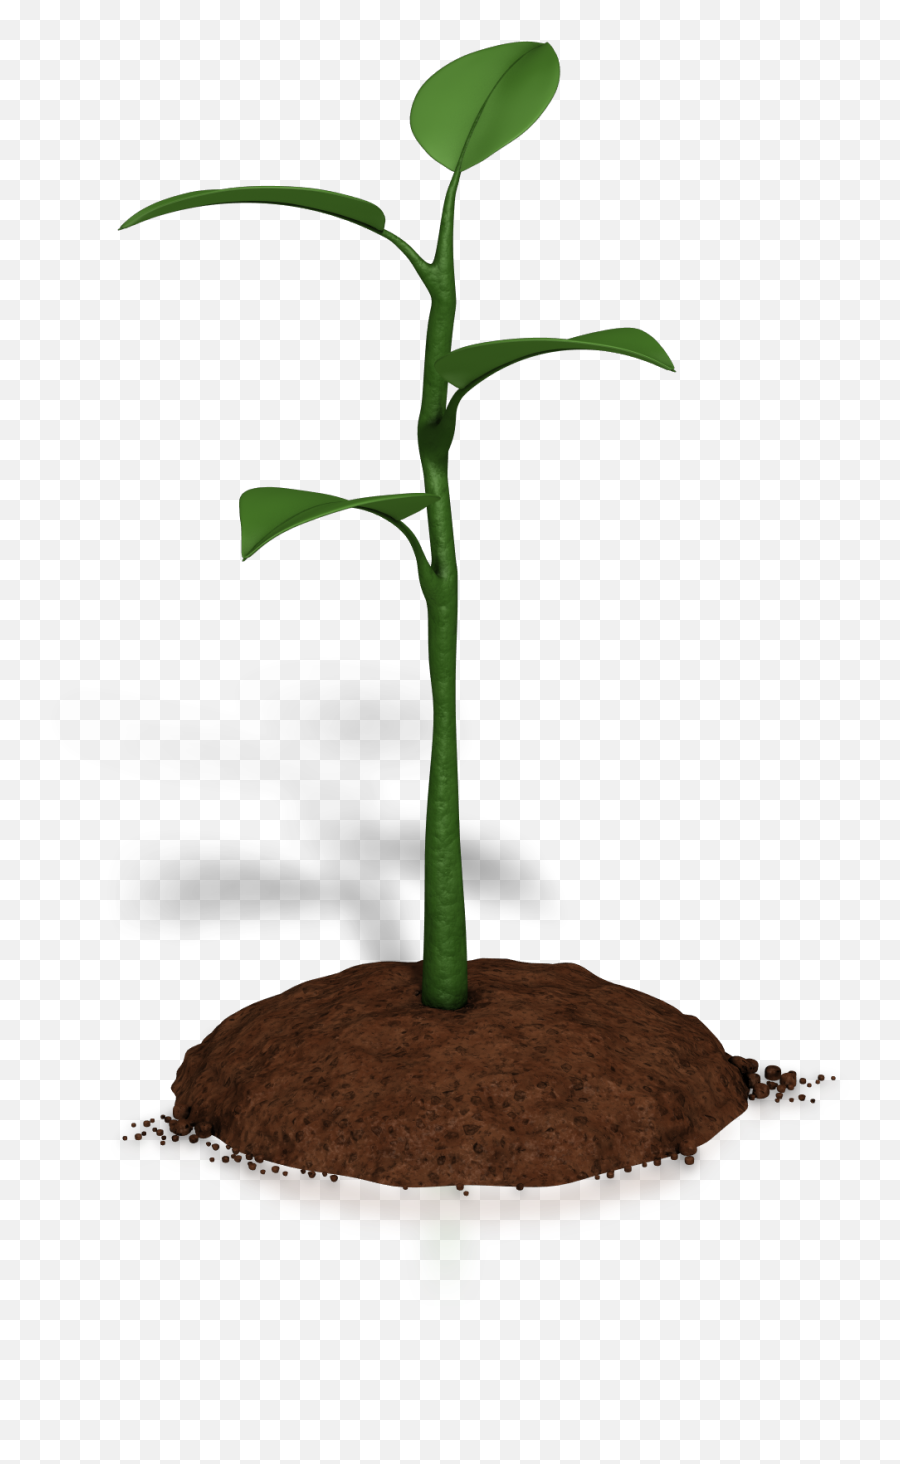 Soil Clipart Plant Growth - Plant Animations For Powerpoint Plant Grow Transparent Animated Gif Emoji,Soil Clipart